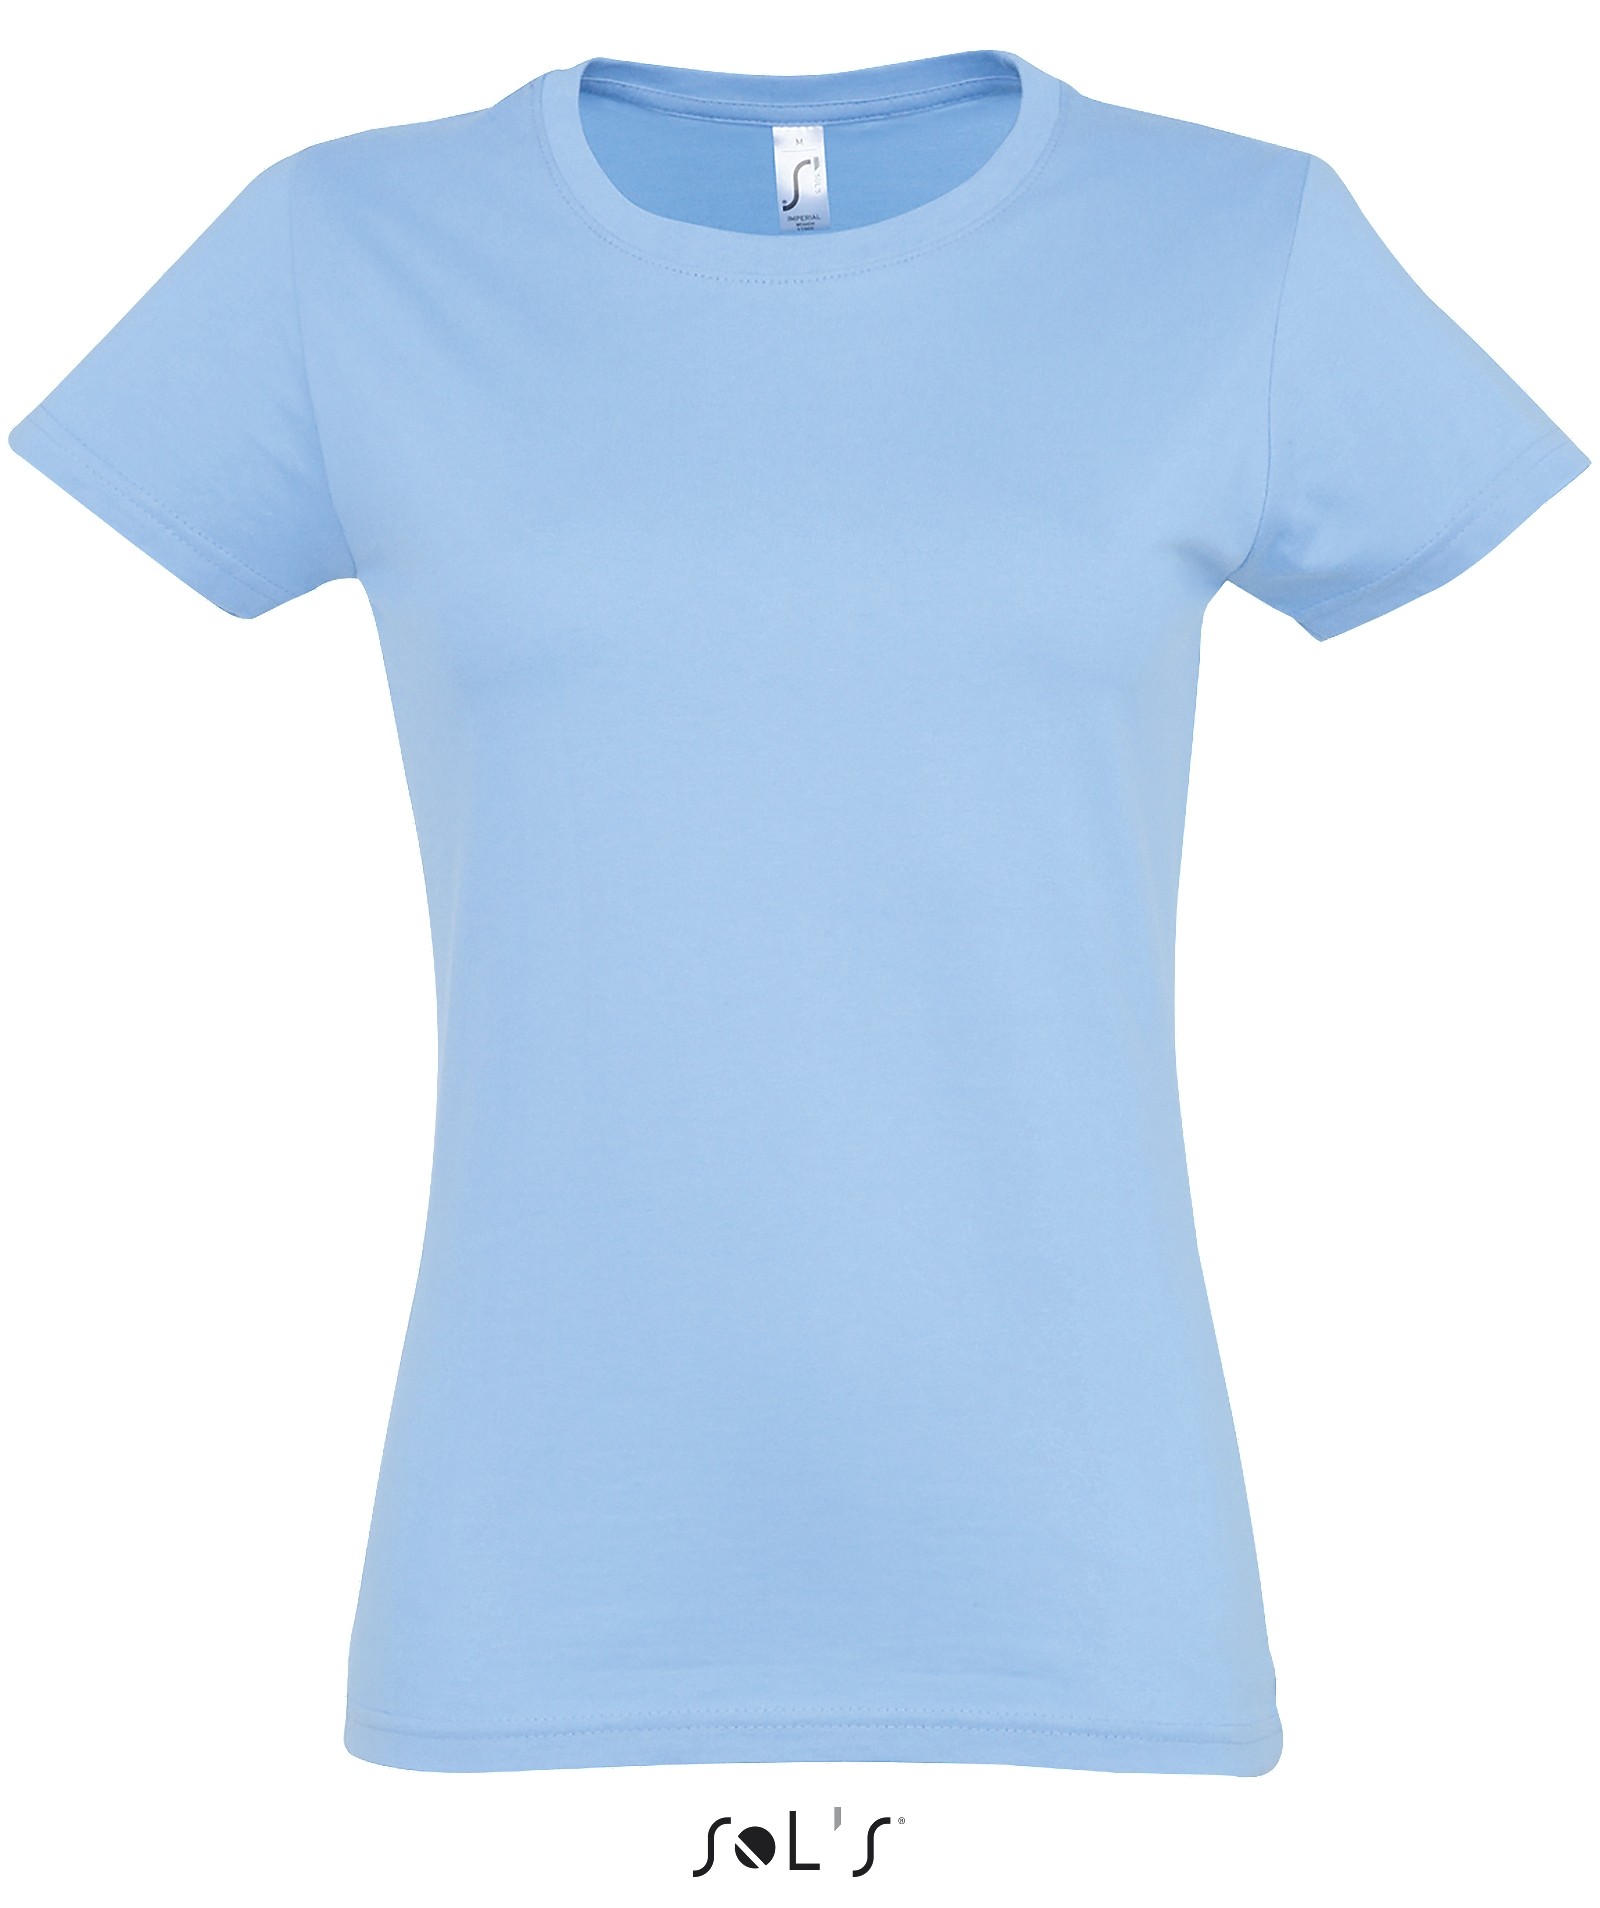 SOL'S IMPERIAL WOMEN - ROUND COLLAR T-SHIRT SKY BLUE